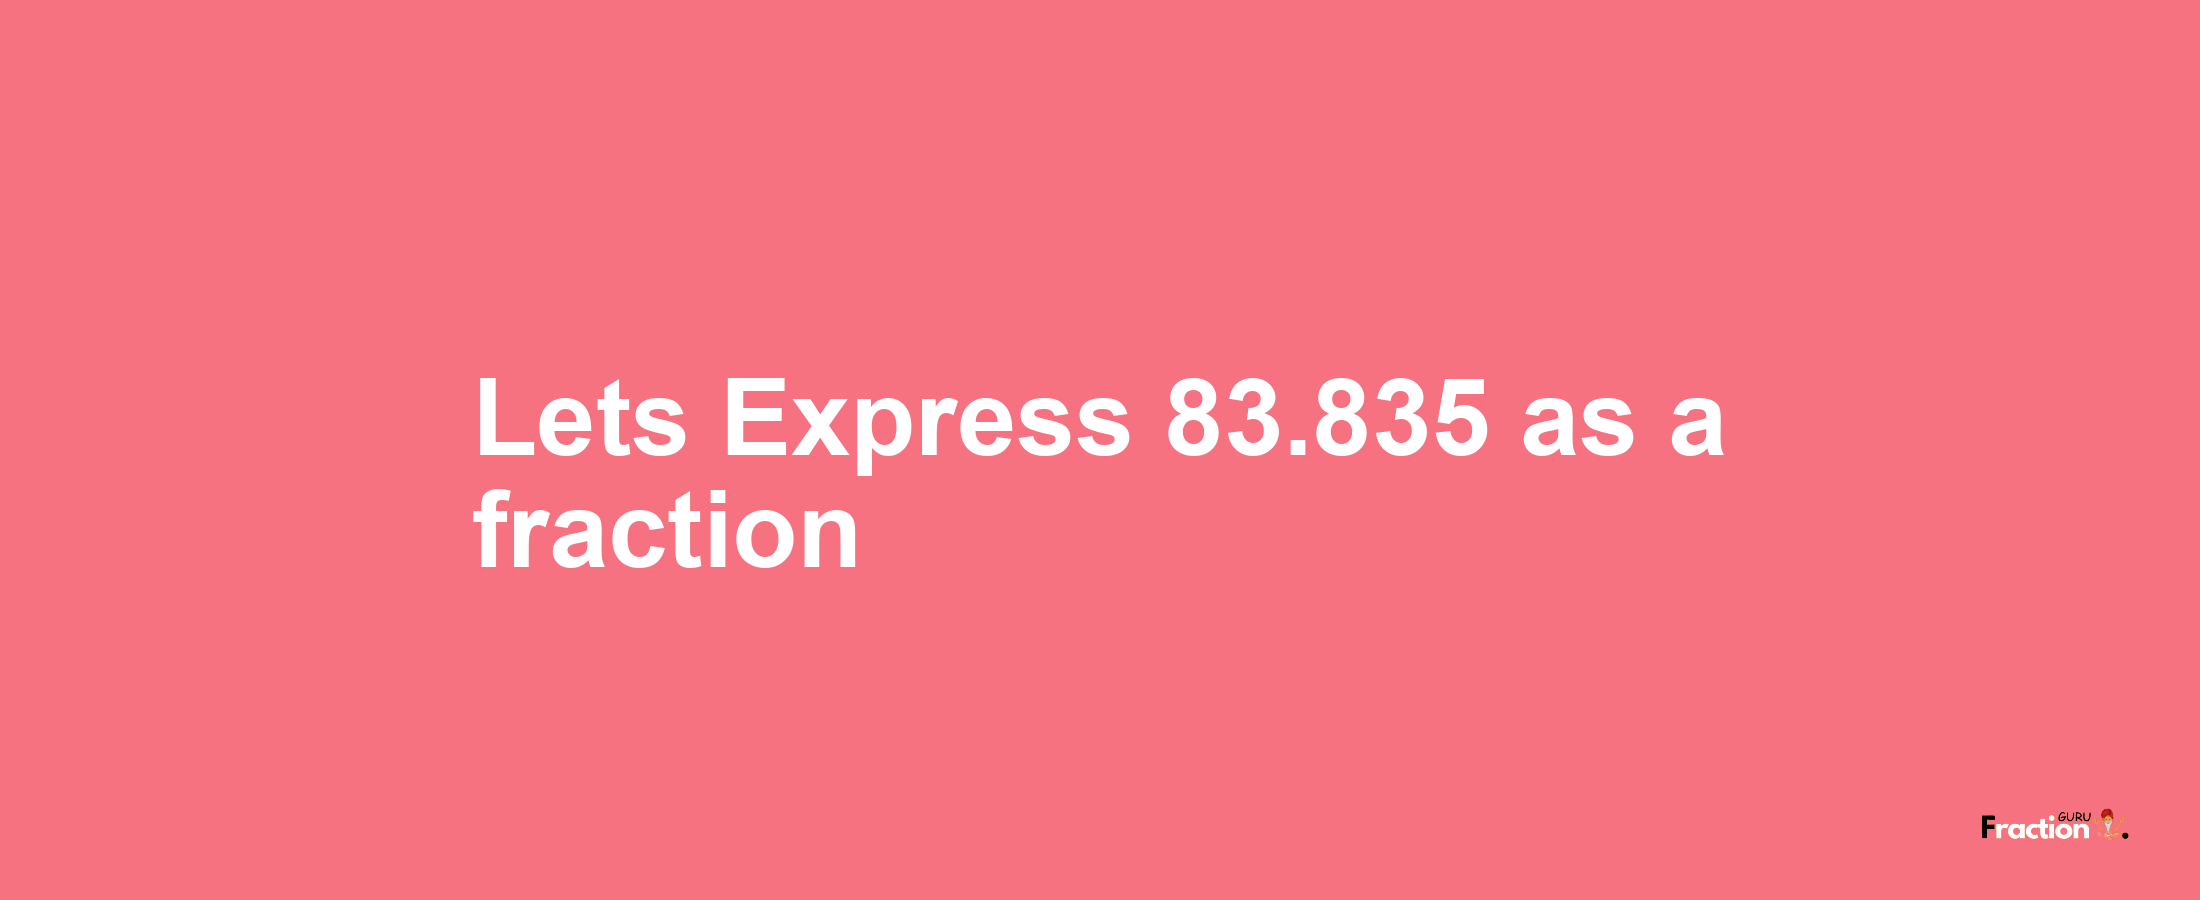 Lets Express 83.835 as afraction